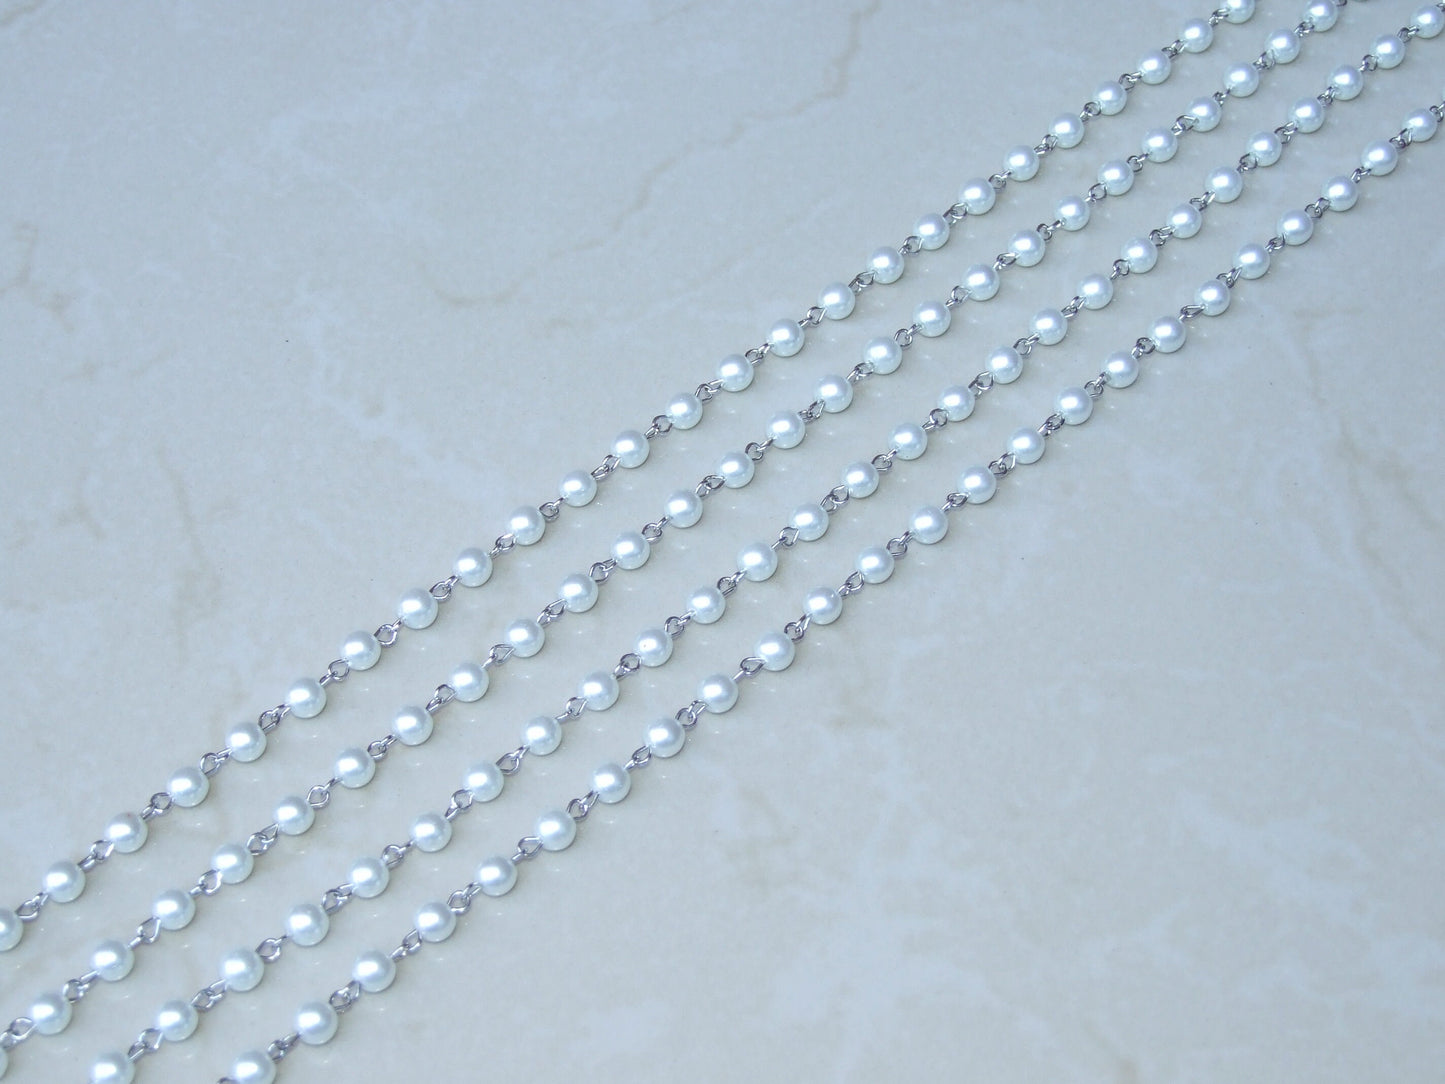 White Pearl Rosary Chain, Bulk Chain, 1 Meter, Glass Beads, Beaded Chain, Body Chain Jewelry, Silver Chain, Necklace Chain, Belly Chain, 6mm